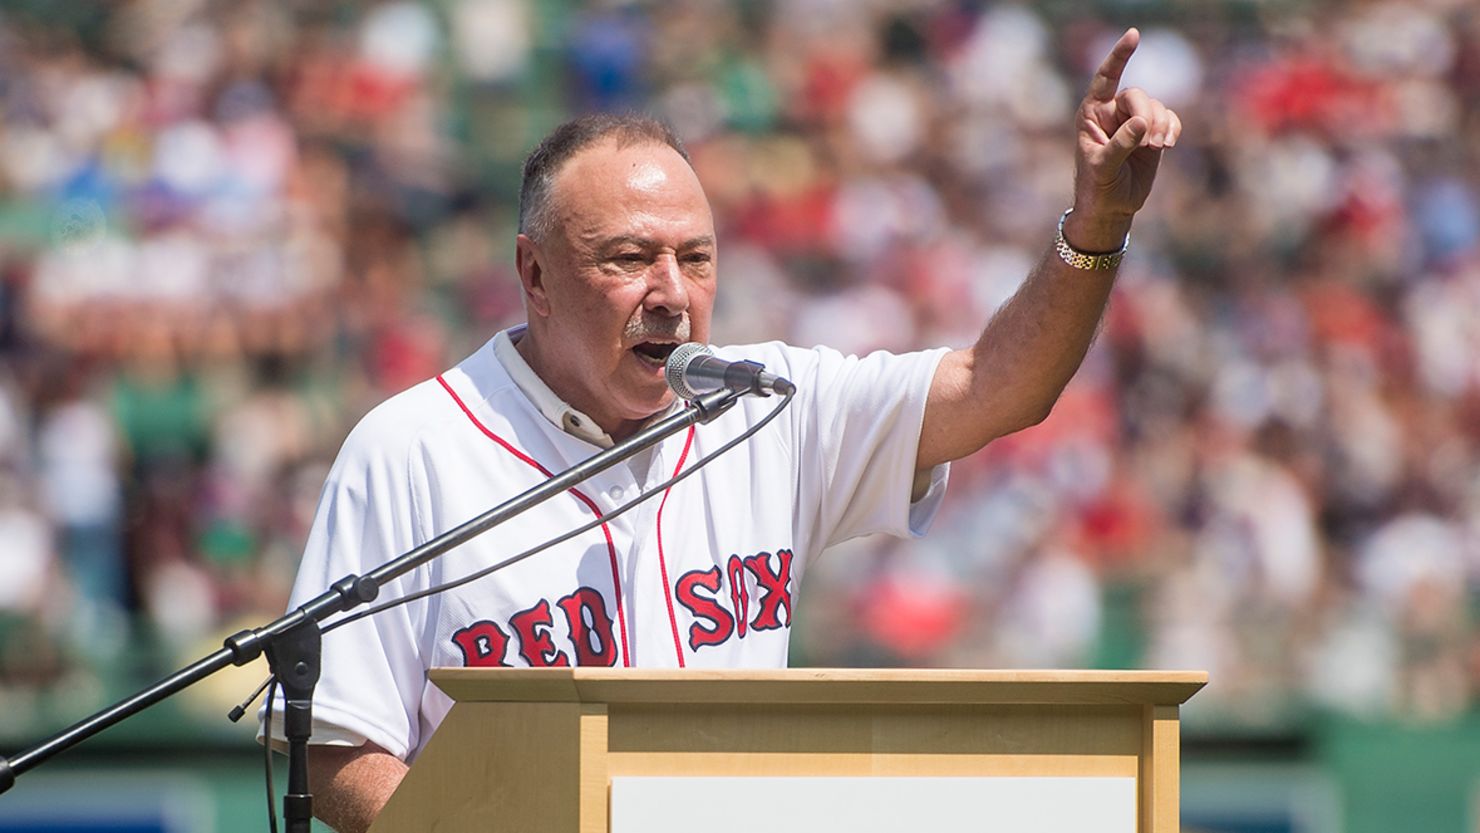 Longtime Boston Red Sox broadcaster Jerry Remy died Saturday night.